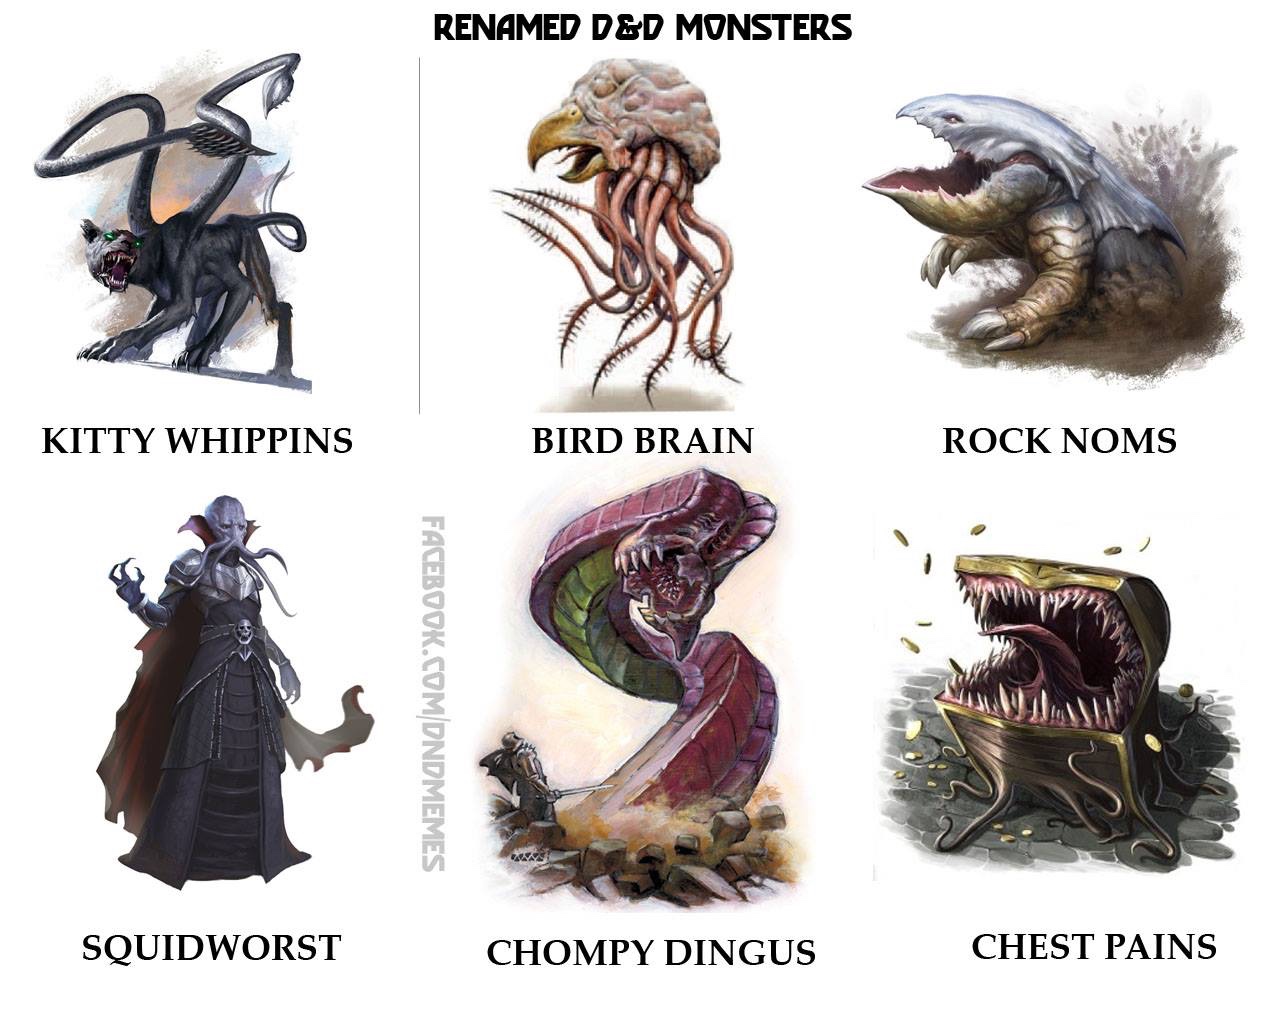 dungeons and dragons monsters - Renamed D&D Monsters Kitty Whippins Bird Brain Rock Noms Facebook.ComDndmemes Squidworst Chompy Dingus Chest Pains